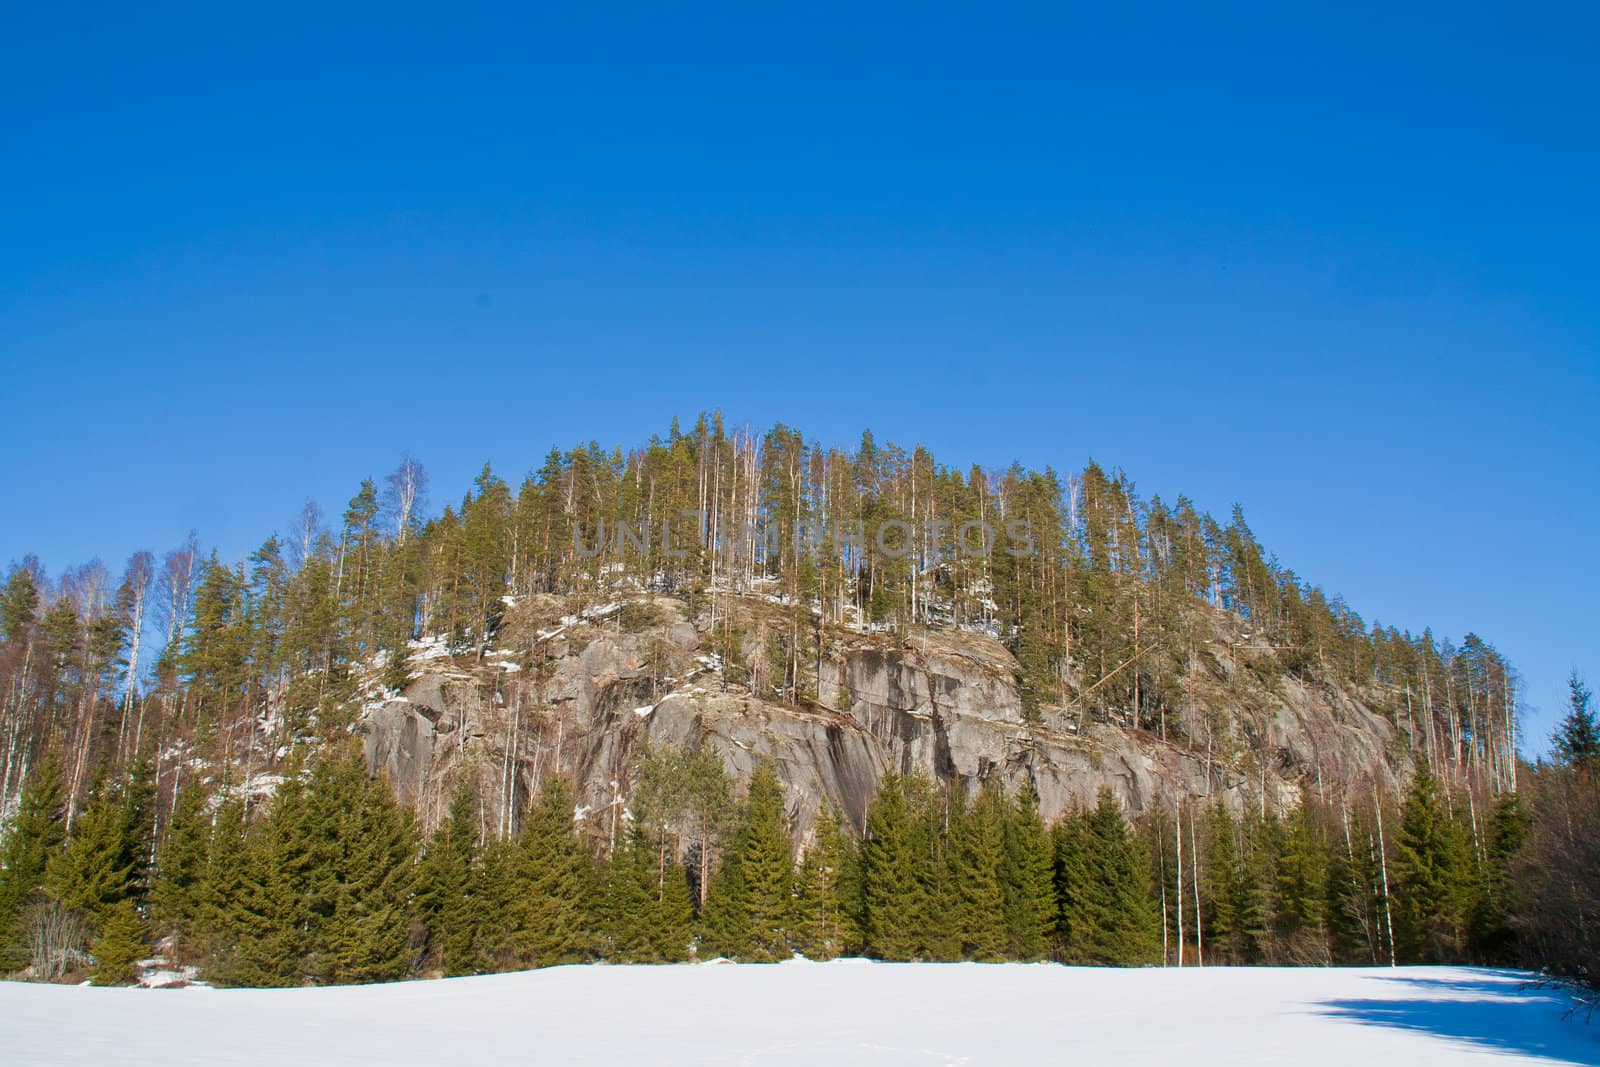 Big rock cliffs with trees